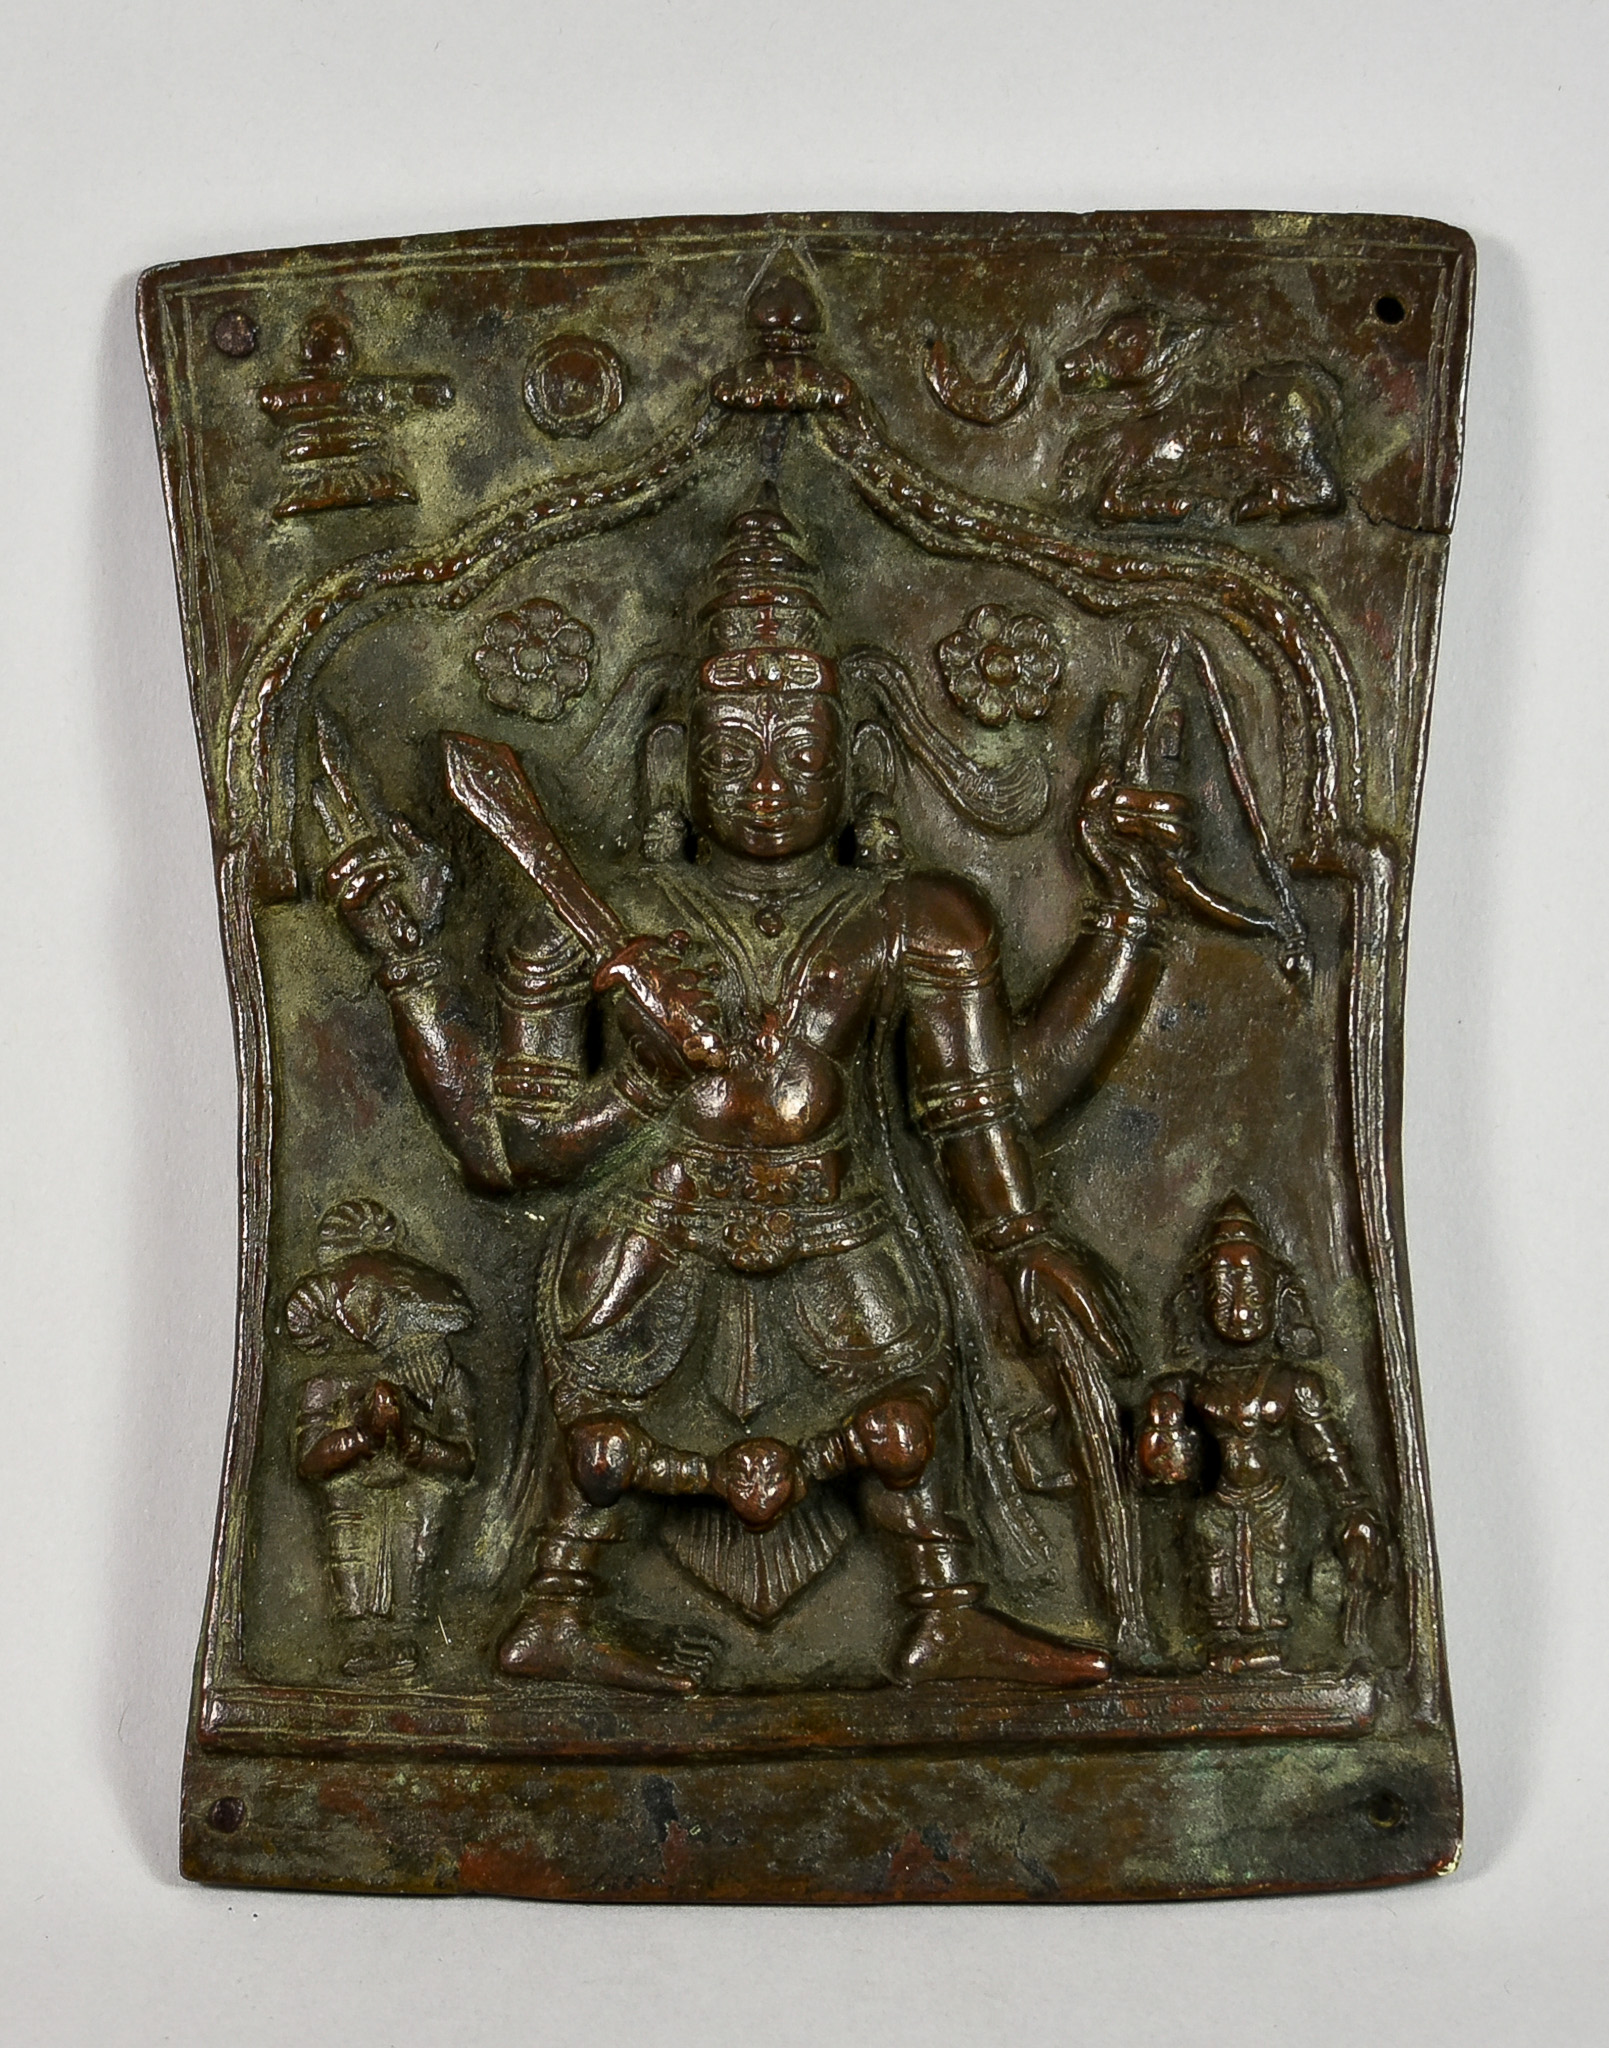 A South Indian Bronze Plaque, 18th/19th Century, possibly Lord Murugan, 7ins (17.8cm) x 5.5ins (